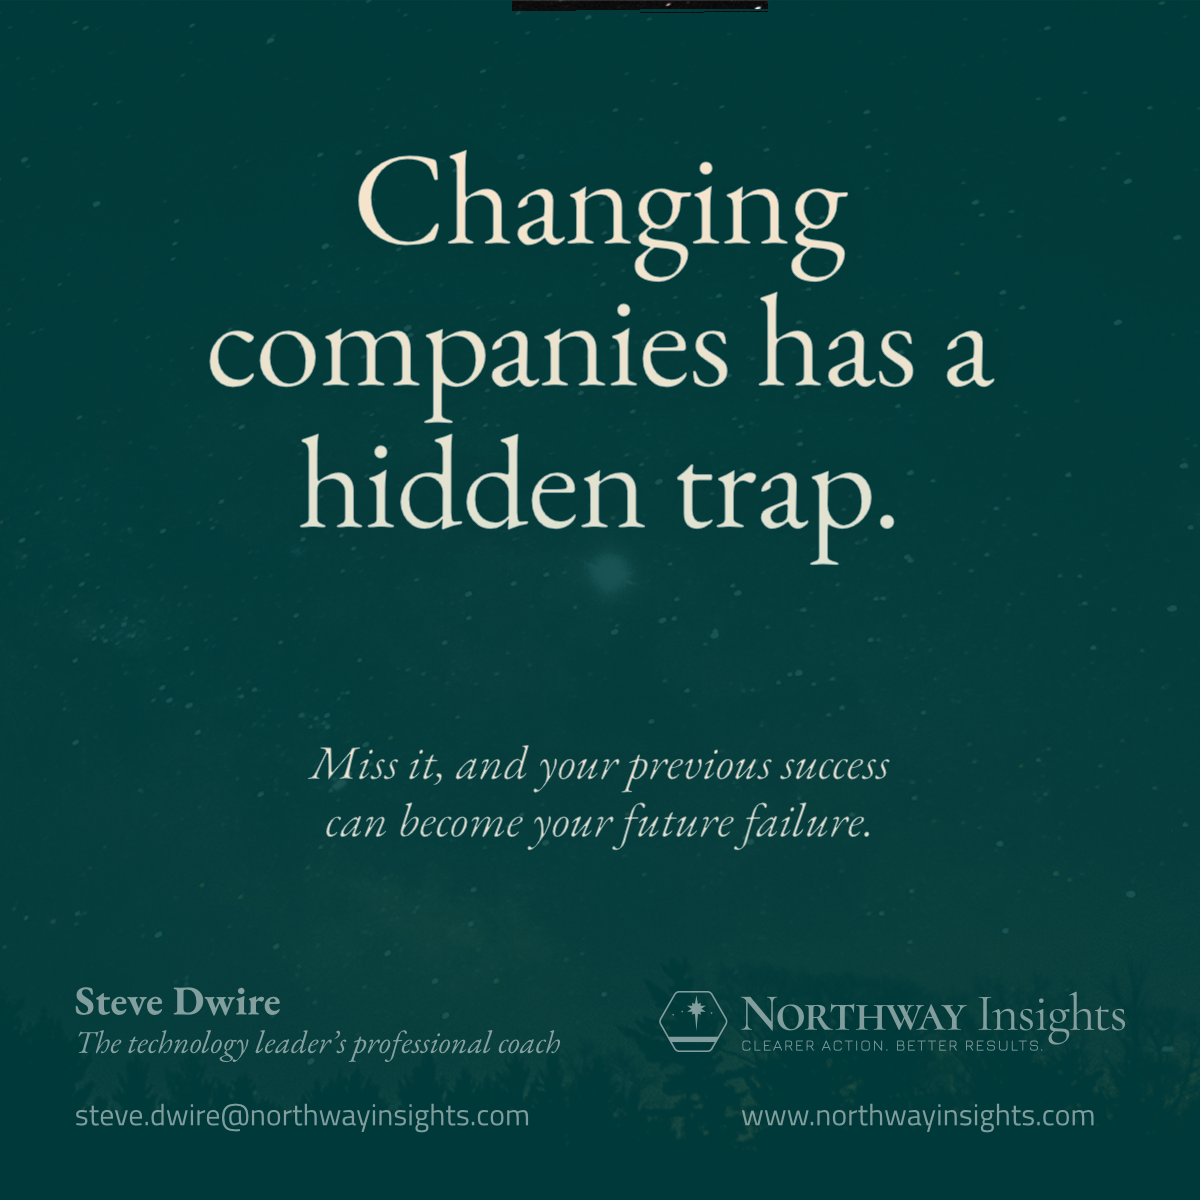 Changing companies has a hidden trap. (Miss it, and your previous success can become your future failure.)